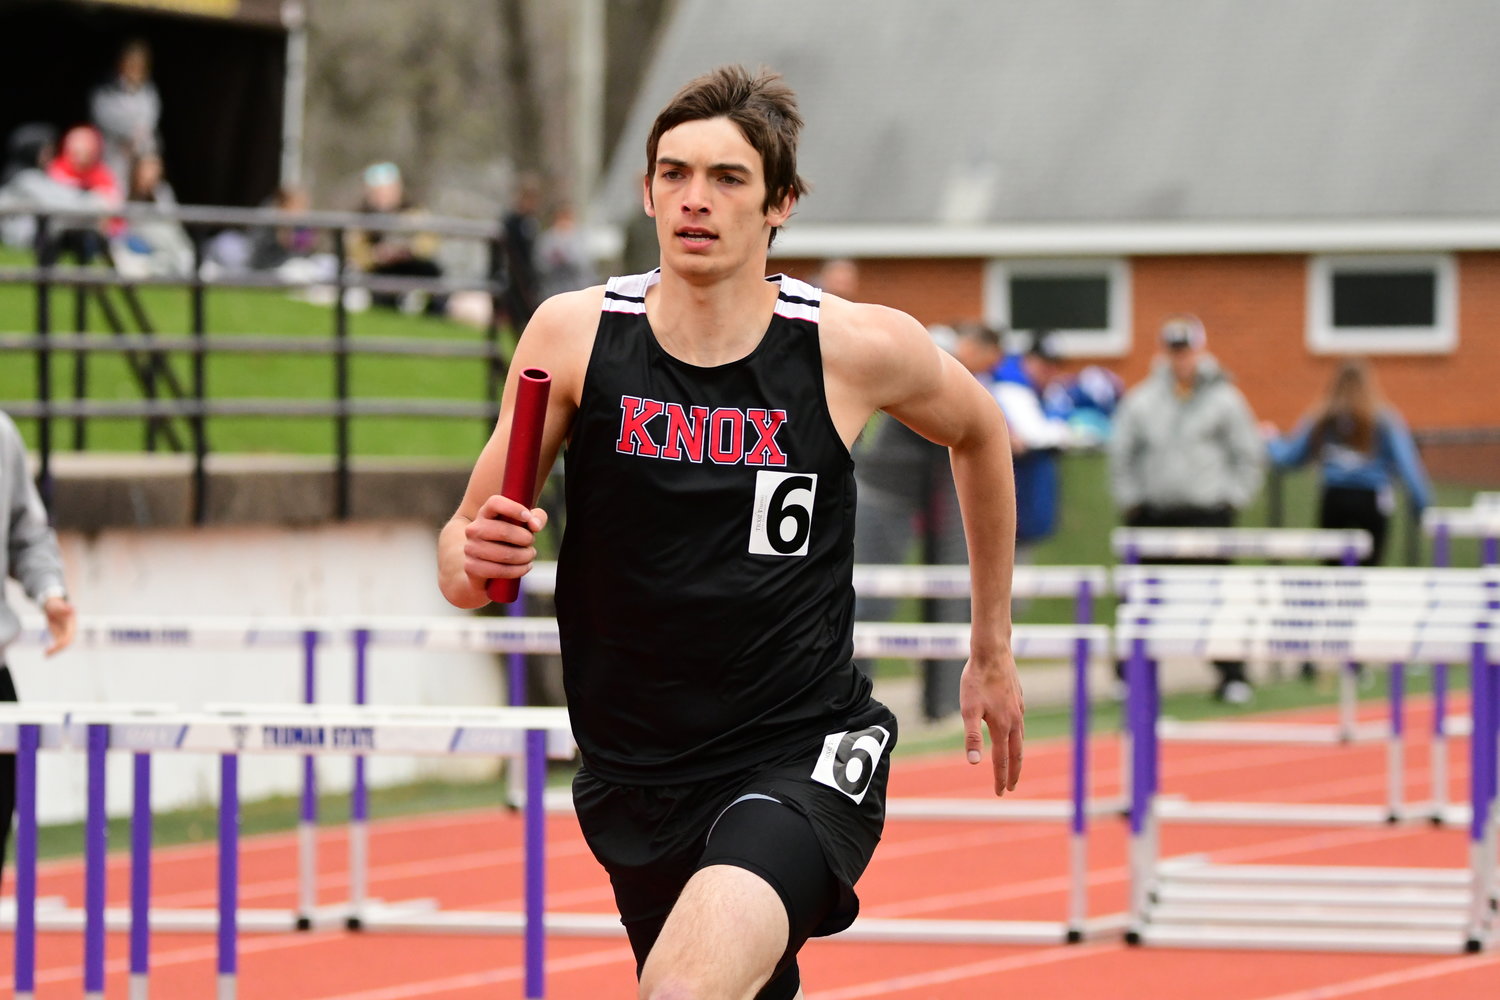 Photos from the 2022 Truman State High School invitational track meet.